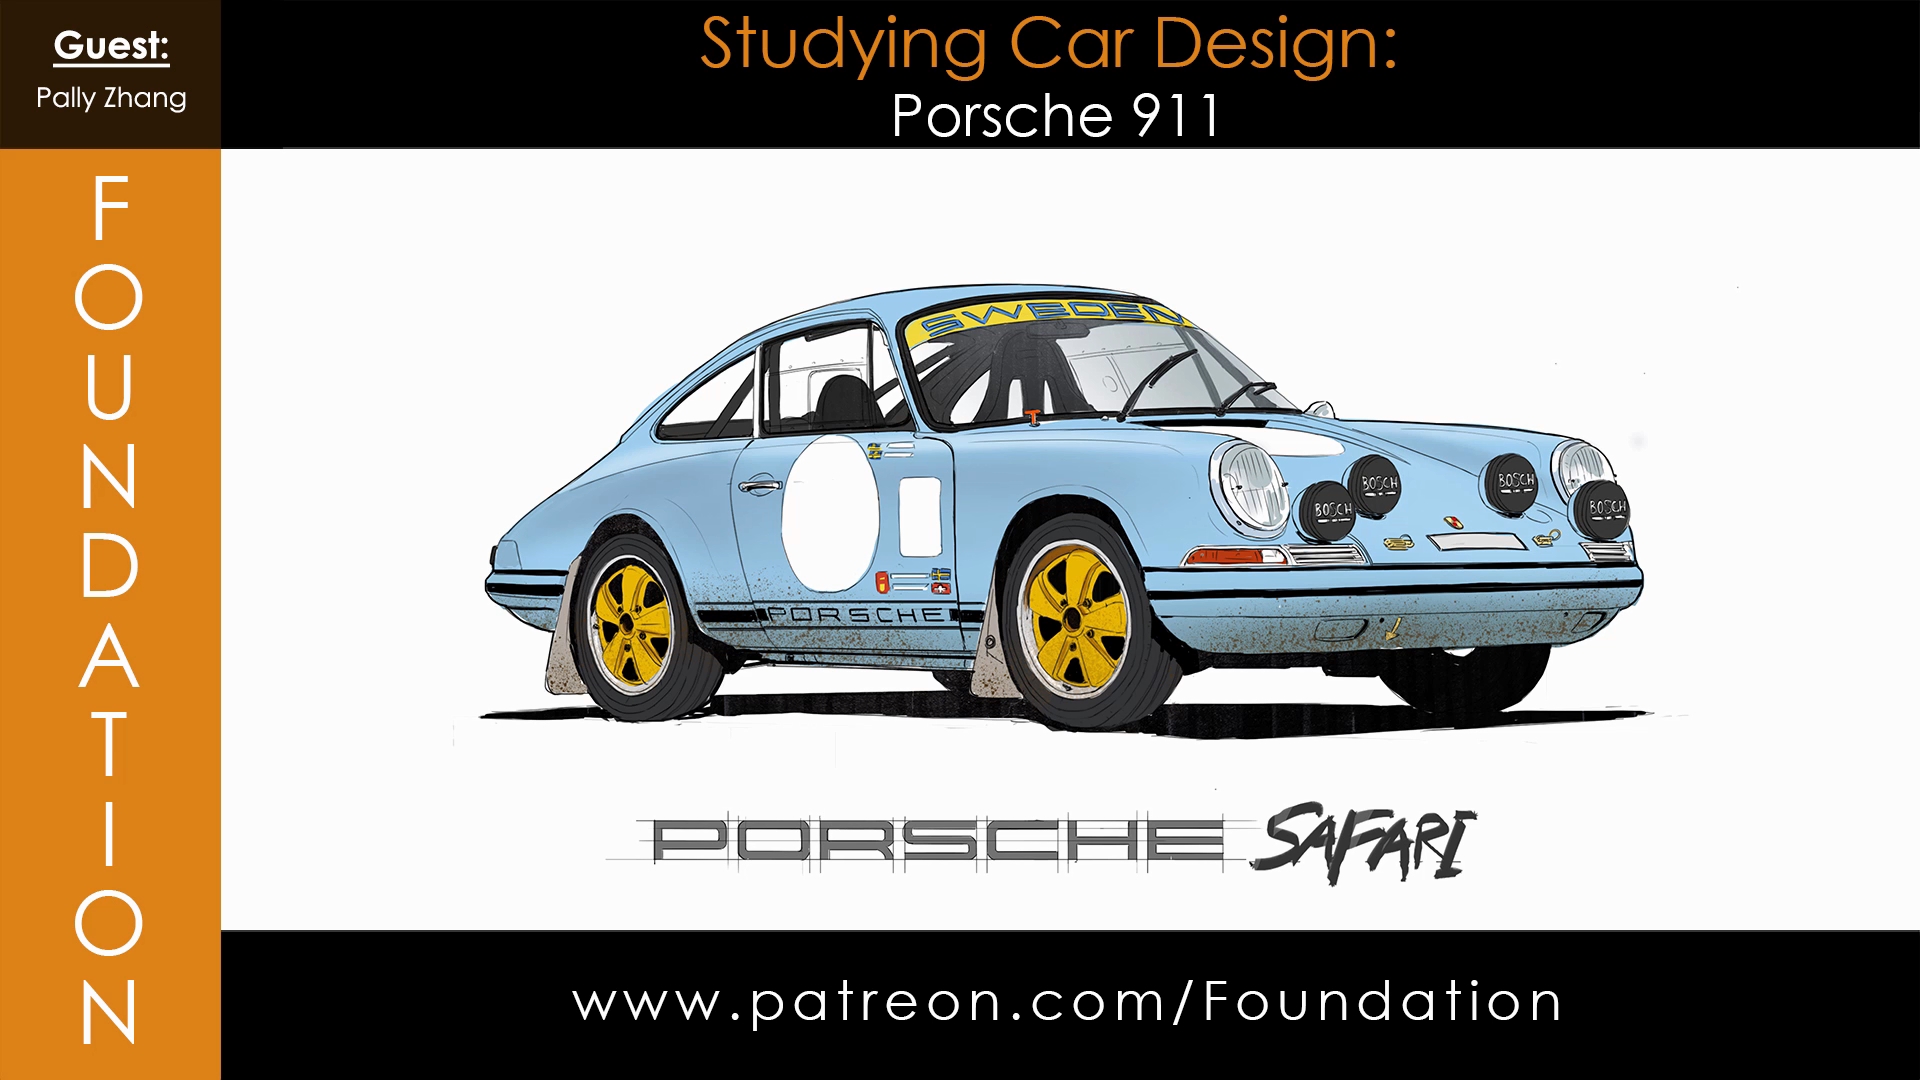 Studying Car Design – Porsche 911 with Pally Zhang